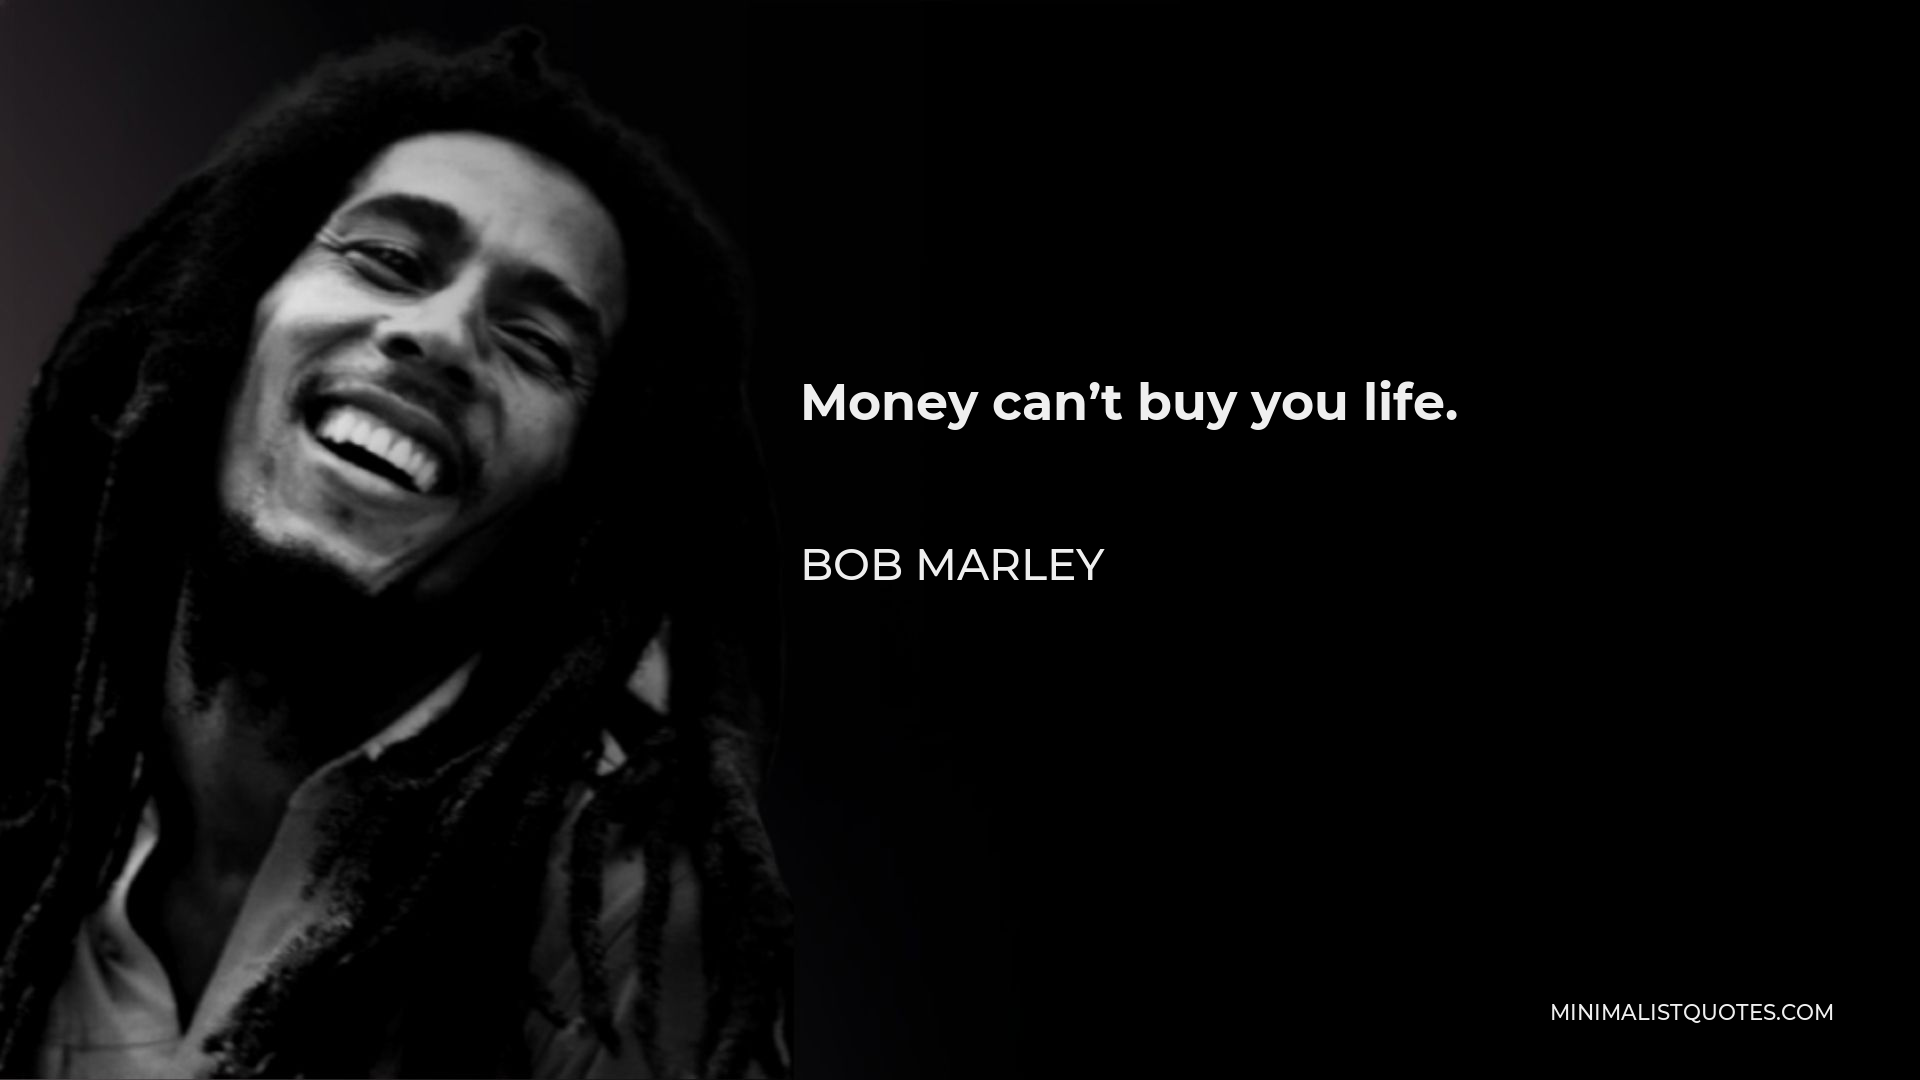 Bob Marley Quote - Money can’t buy you life.